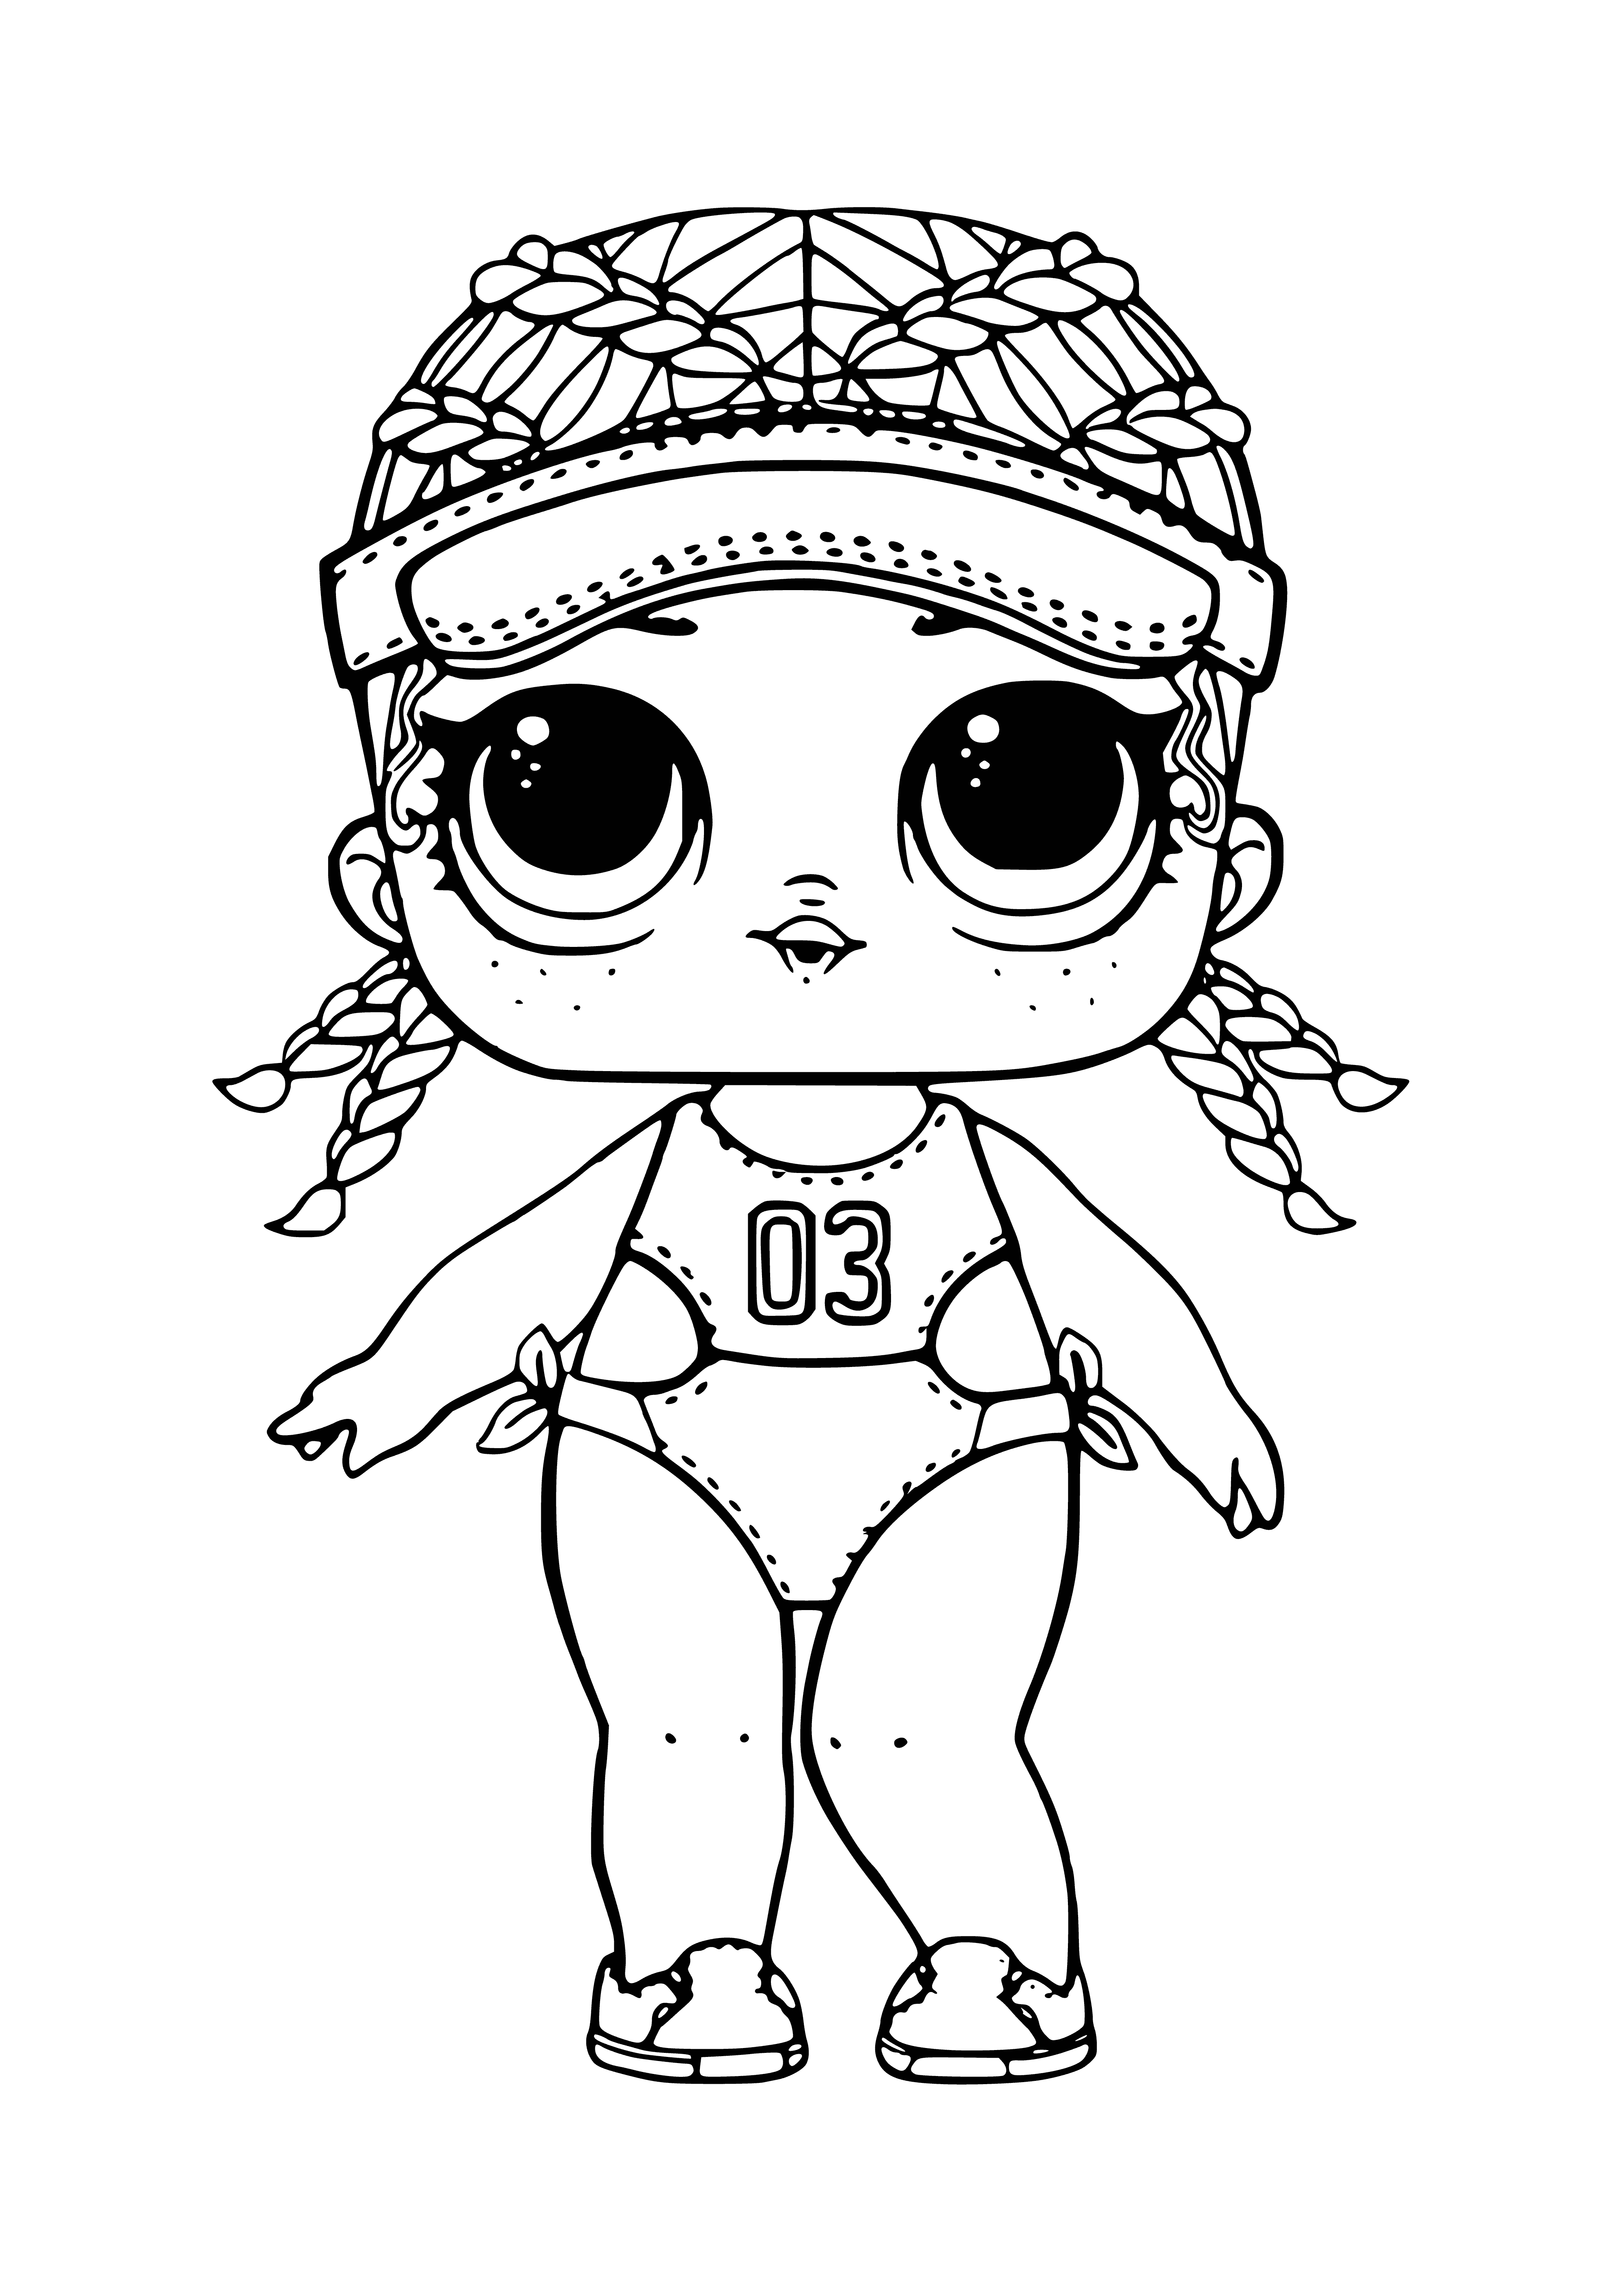 coloring page: Figure of woman running with a confetti popper and L.O.L. logo on her shirt; perfect for kids who love a bit of excitement!